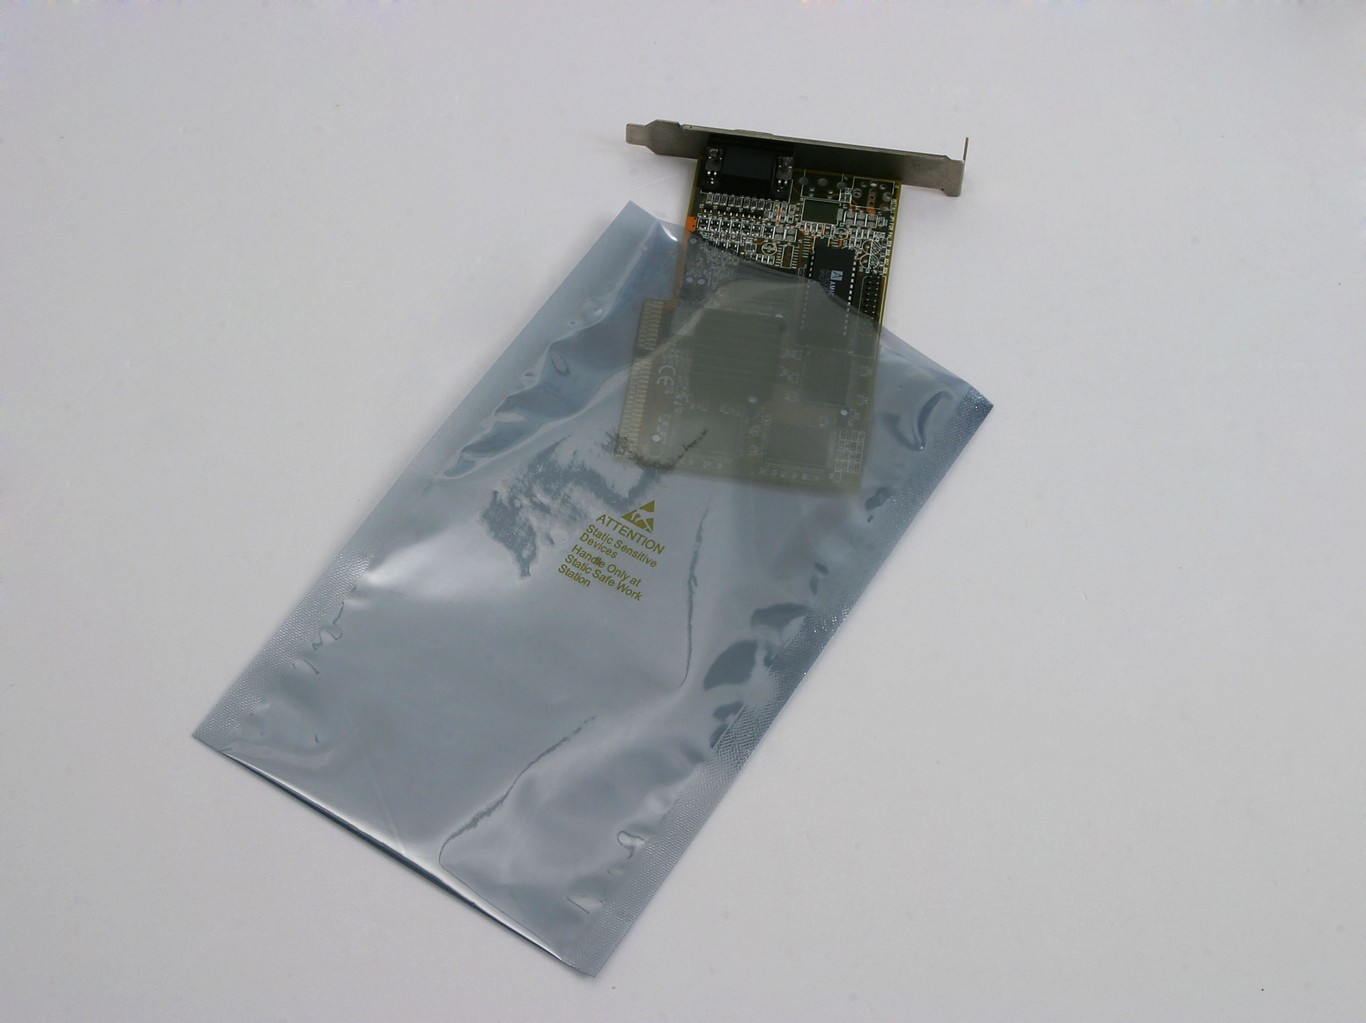 Tips for proper use of ESD Shielding Bags - Anti-Static, ESD, Clean Room  Products - Electronic Component and Engineering Solution Forum - TechForum  │ Digi-Key